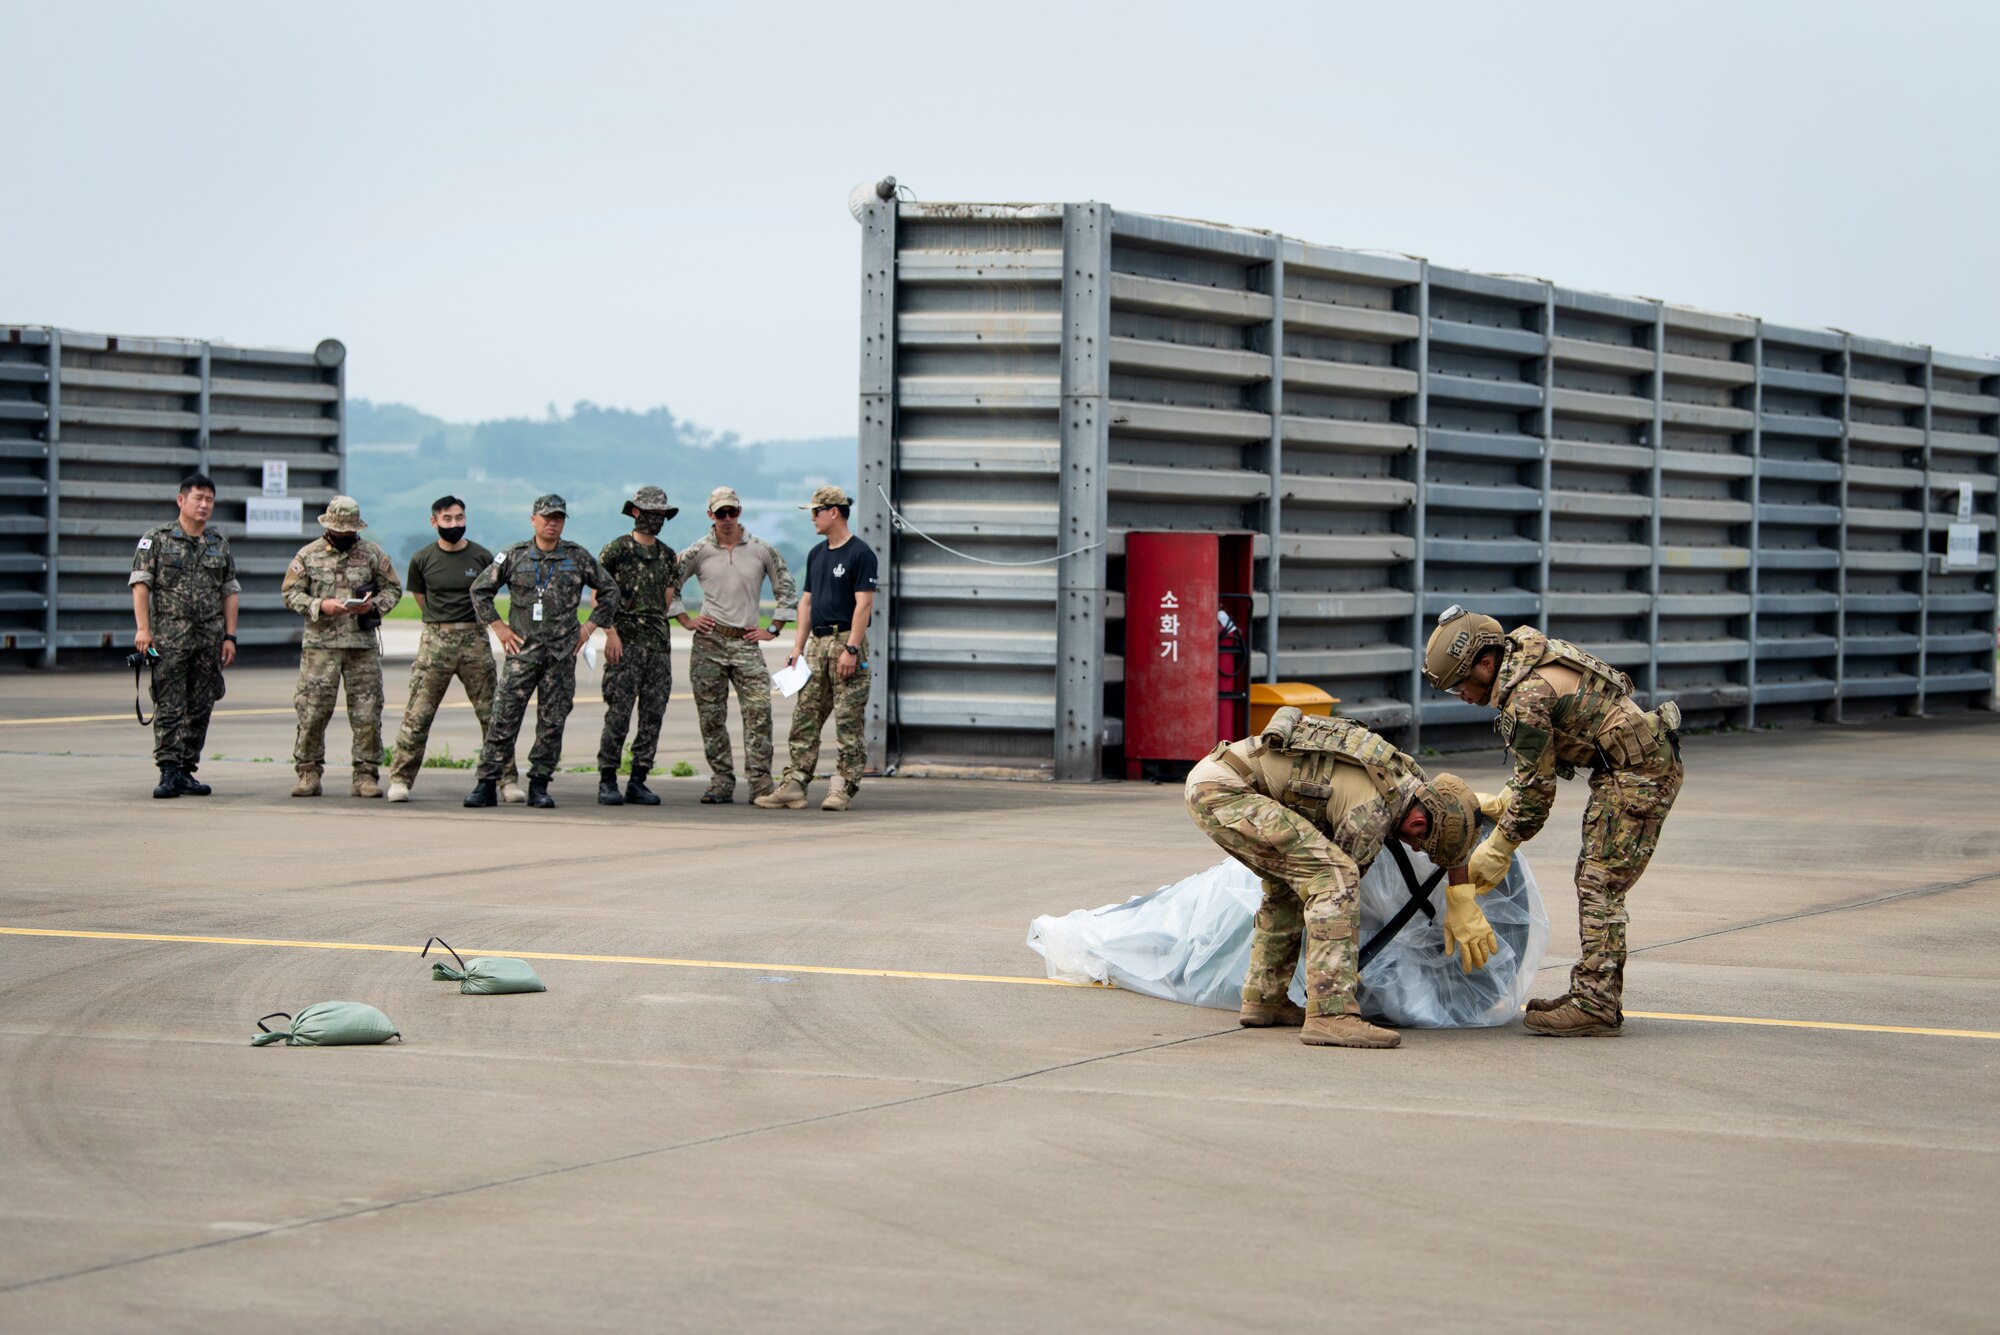 Members of the Republic of Korea Air Force, Explosive Ordnance Disposal team, observe as U.S. Air Force Staff Sgt. Michael Augustus and Senior Airman Joshua Young, 35th Civil Engineer Squadron, Explosive Ordnance Disposal technicians from Misawa Air Base, Japan, practice covering a mock chemical weapon during a bilateral training event at Suwon Air Base, Republic of Korea, July 6, 2022.